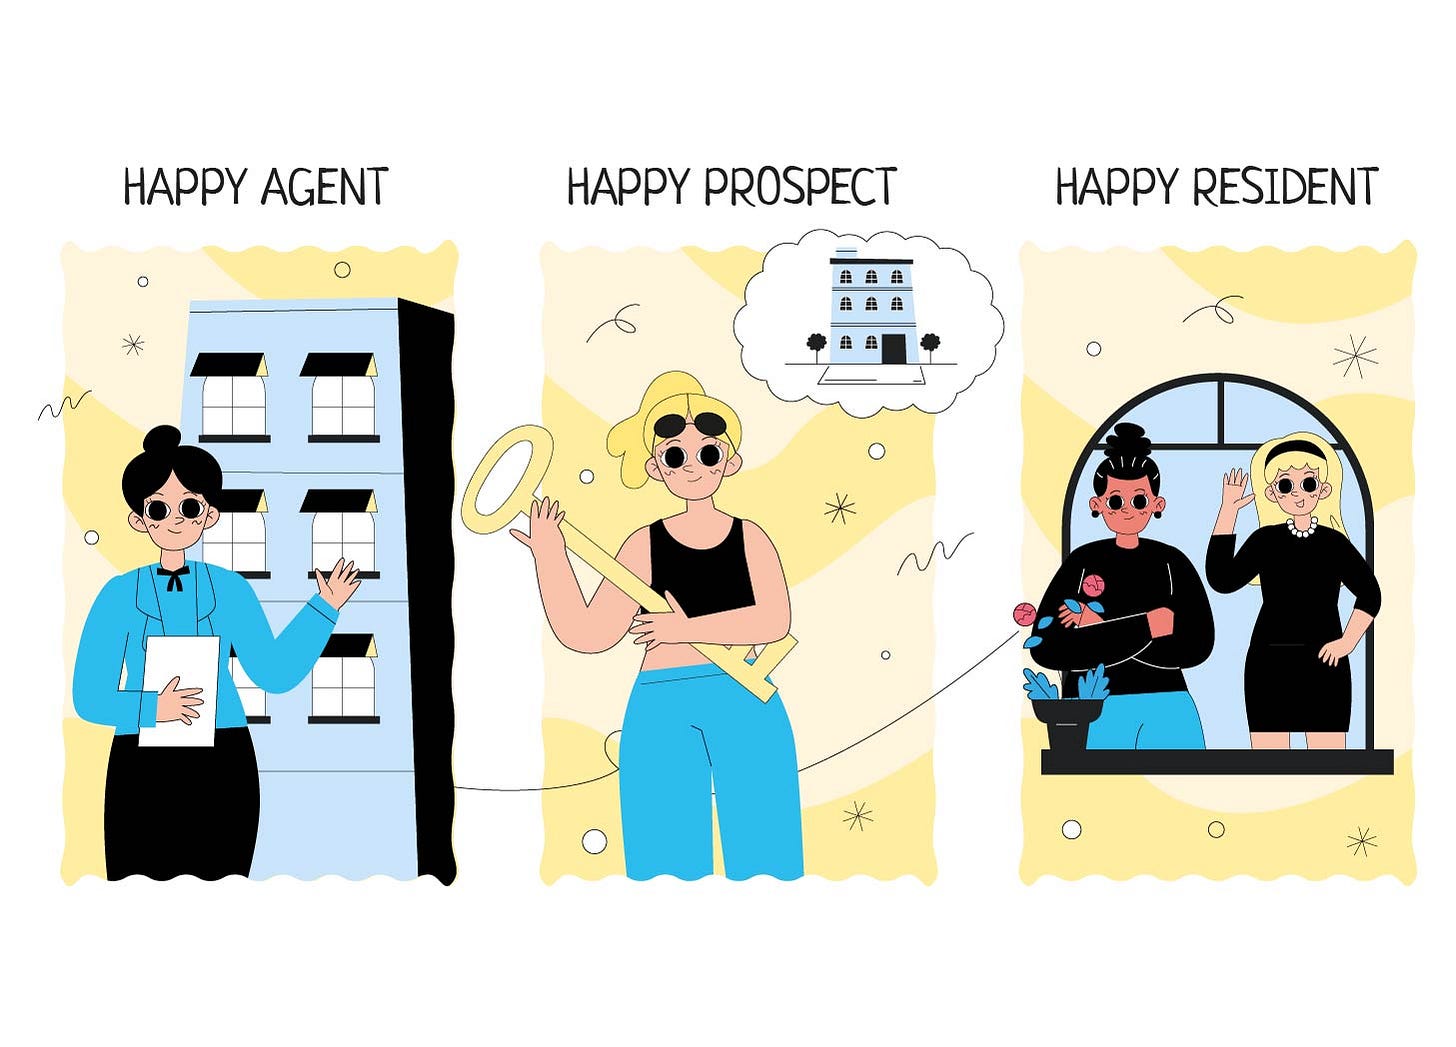 Image showing happy agent, prospect and residents